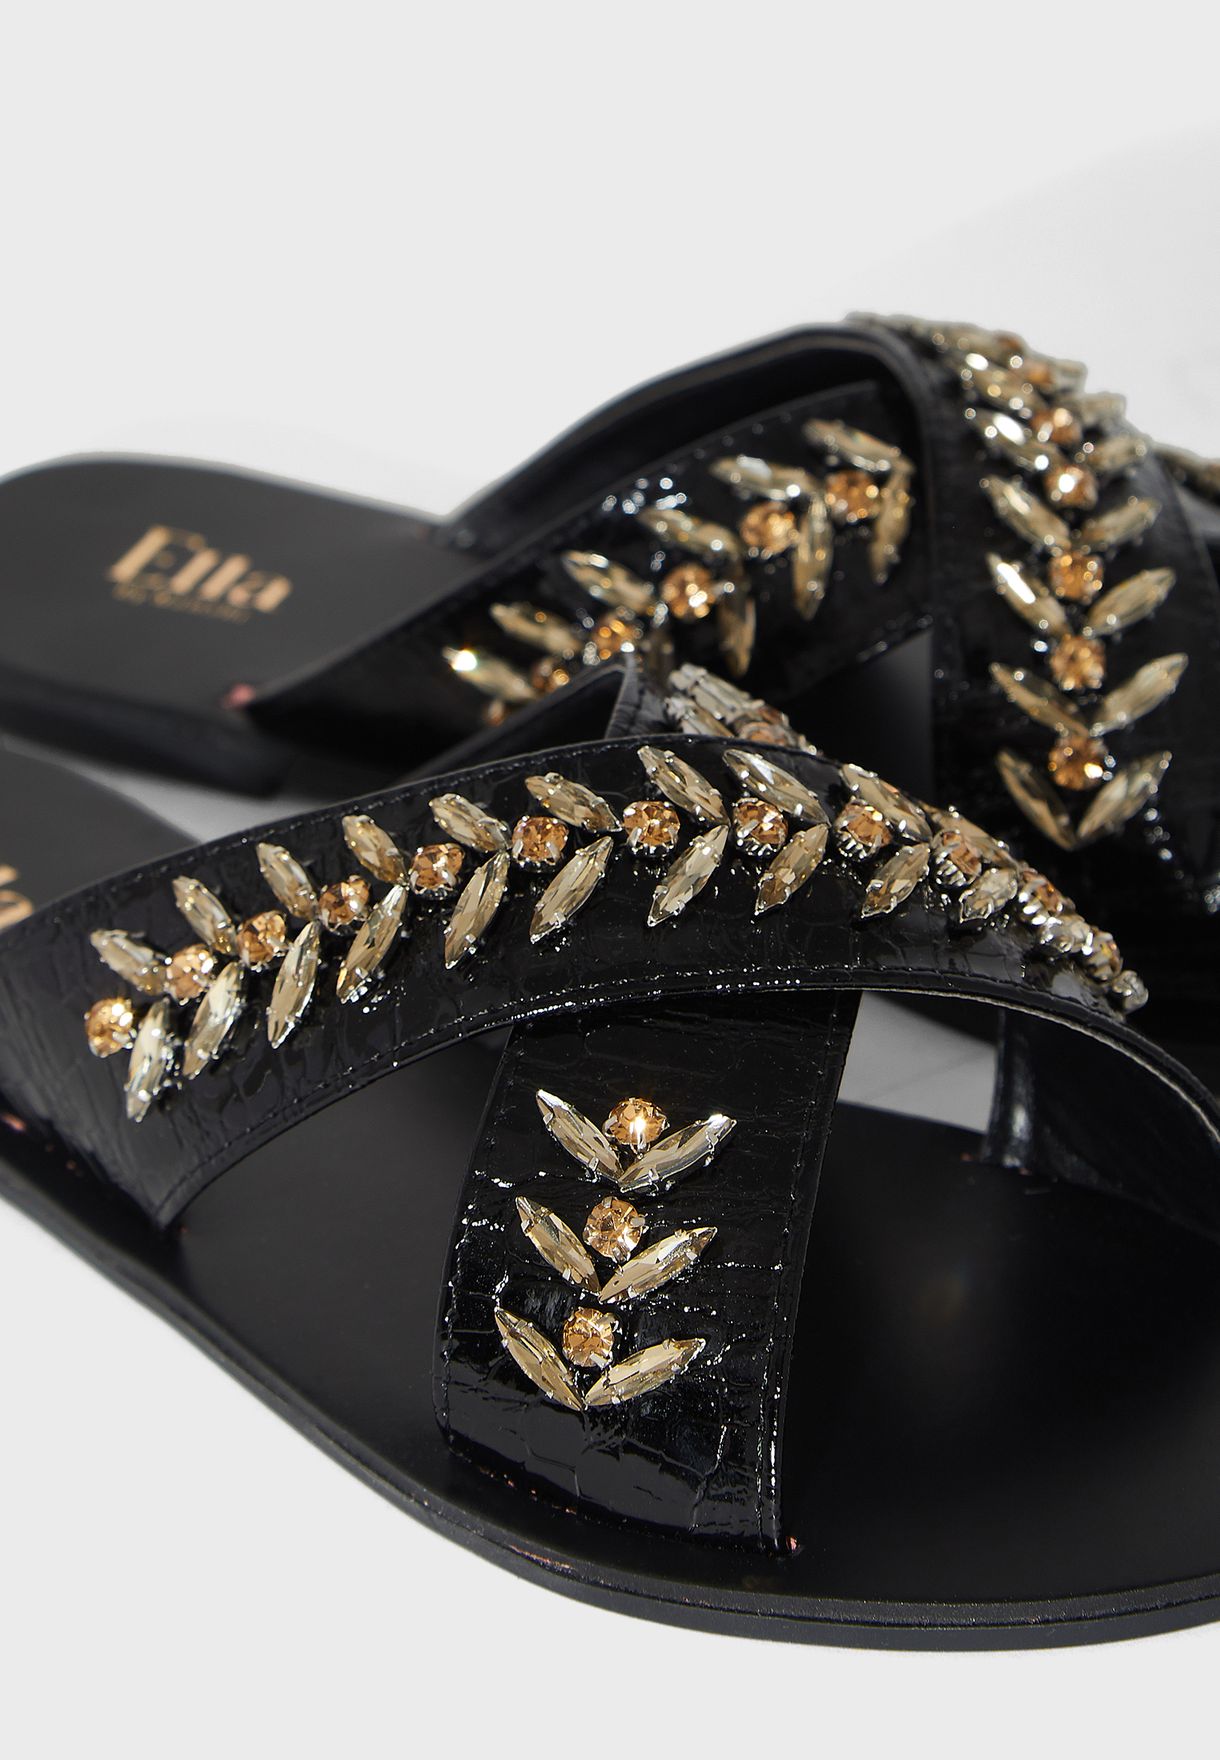 Cross Front Sandal With Embellishment